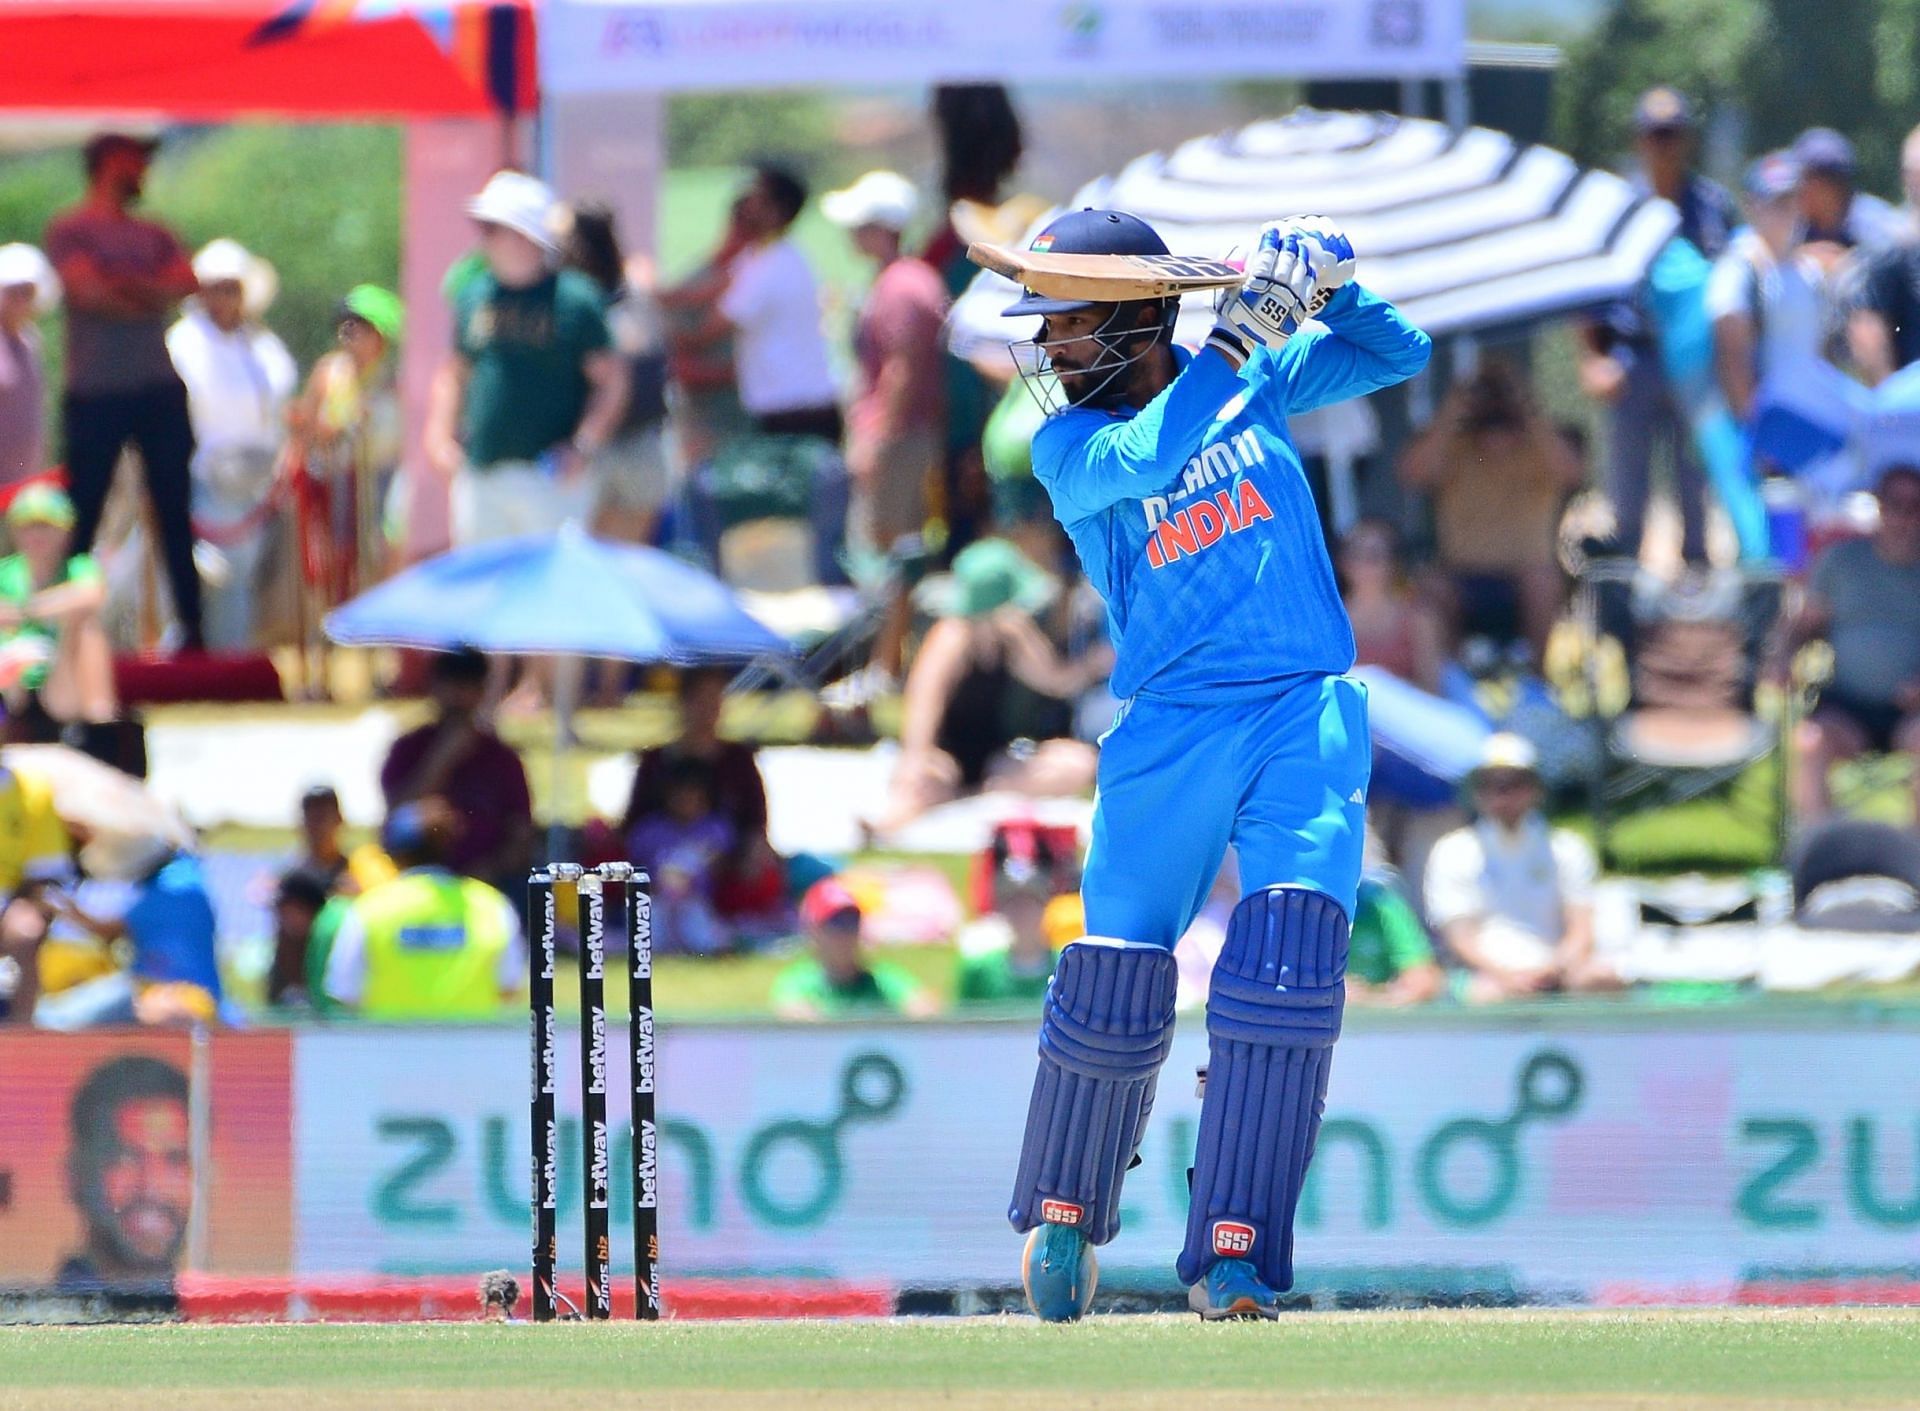 Rajat Patidar has played a solitary ODI for India. [P/C: Getty]